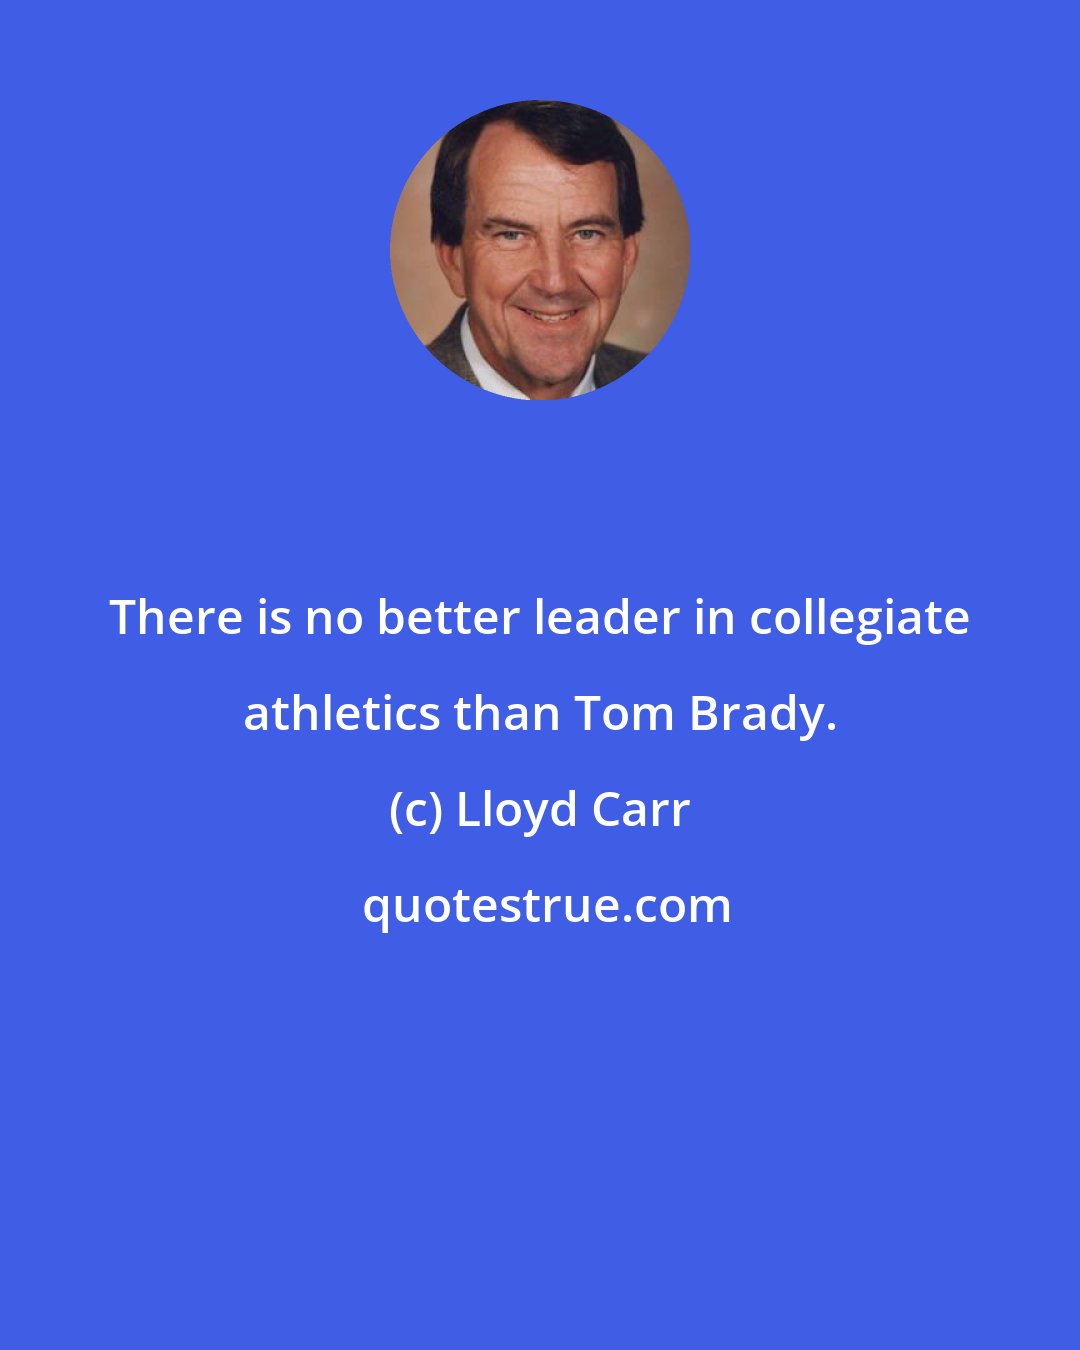 Lloyd Carr: There is no better leader in collegiate athletics than Tom Brady.